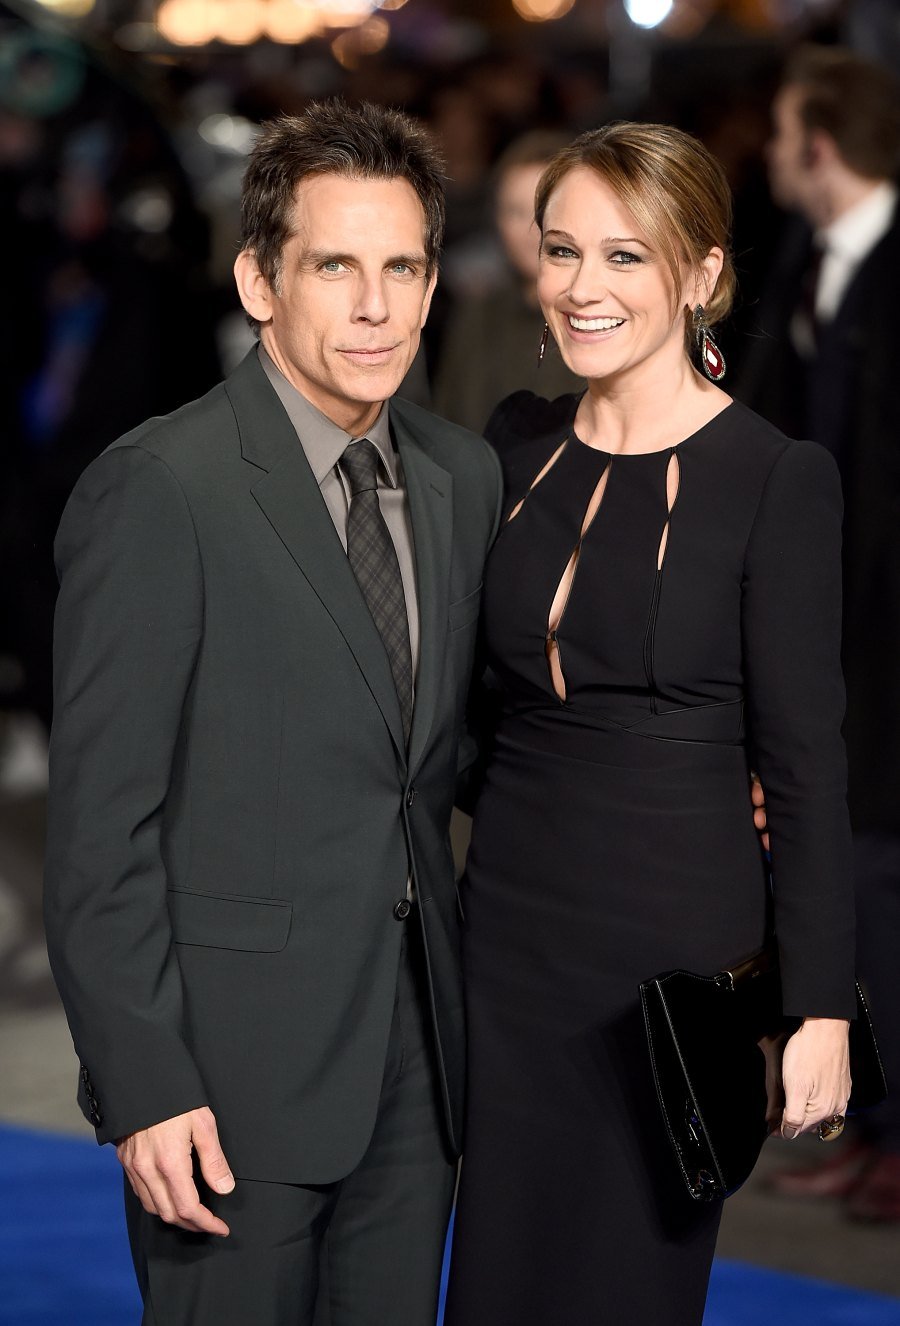 Ben Stiller and Christine Taylor at Empire Leicester Square on December 15, 2014 in London, England. | Source: Getty Images